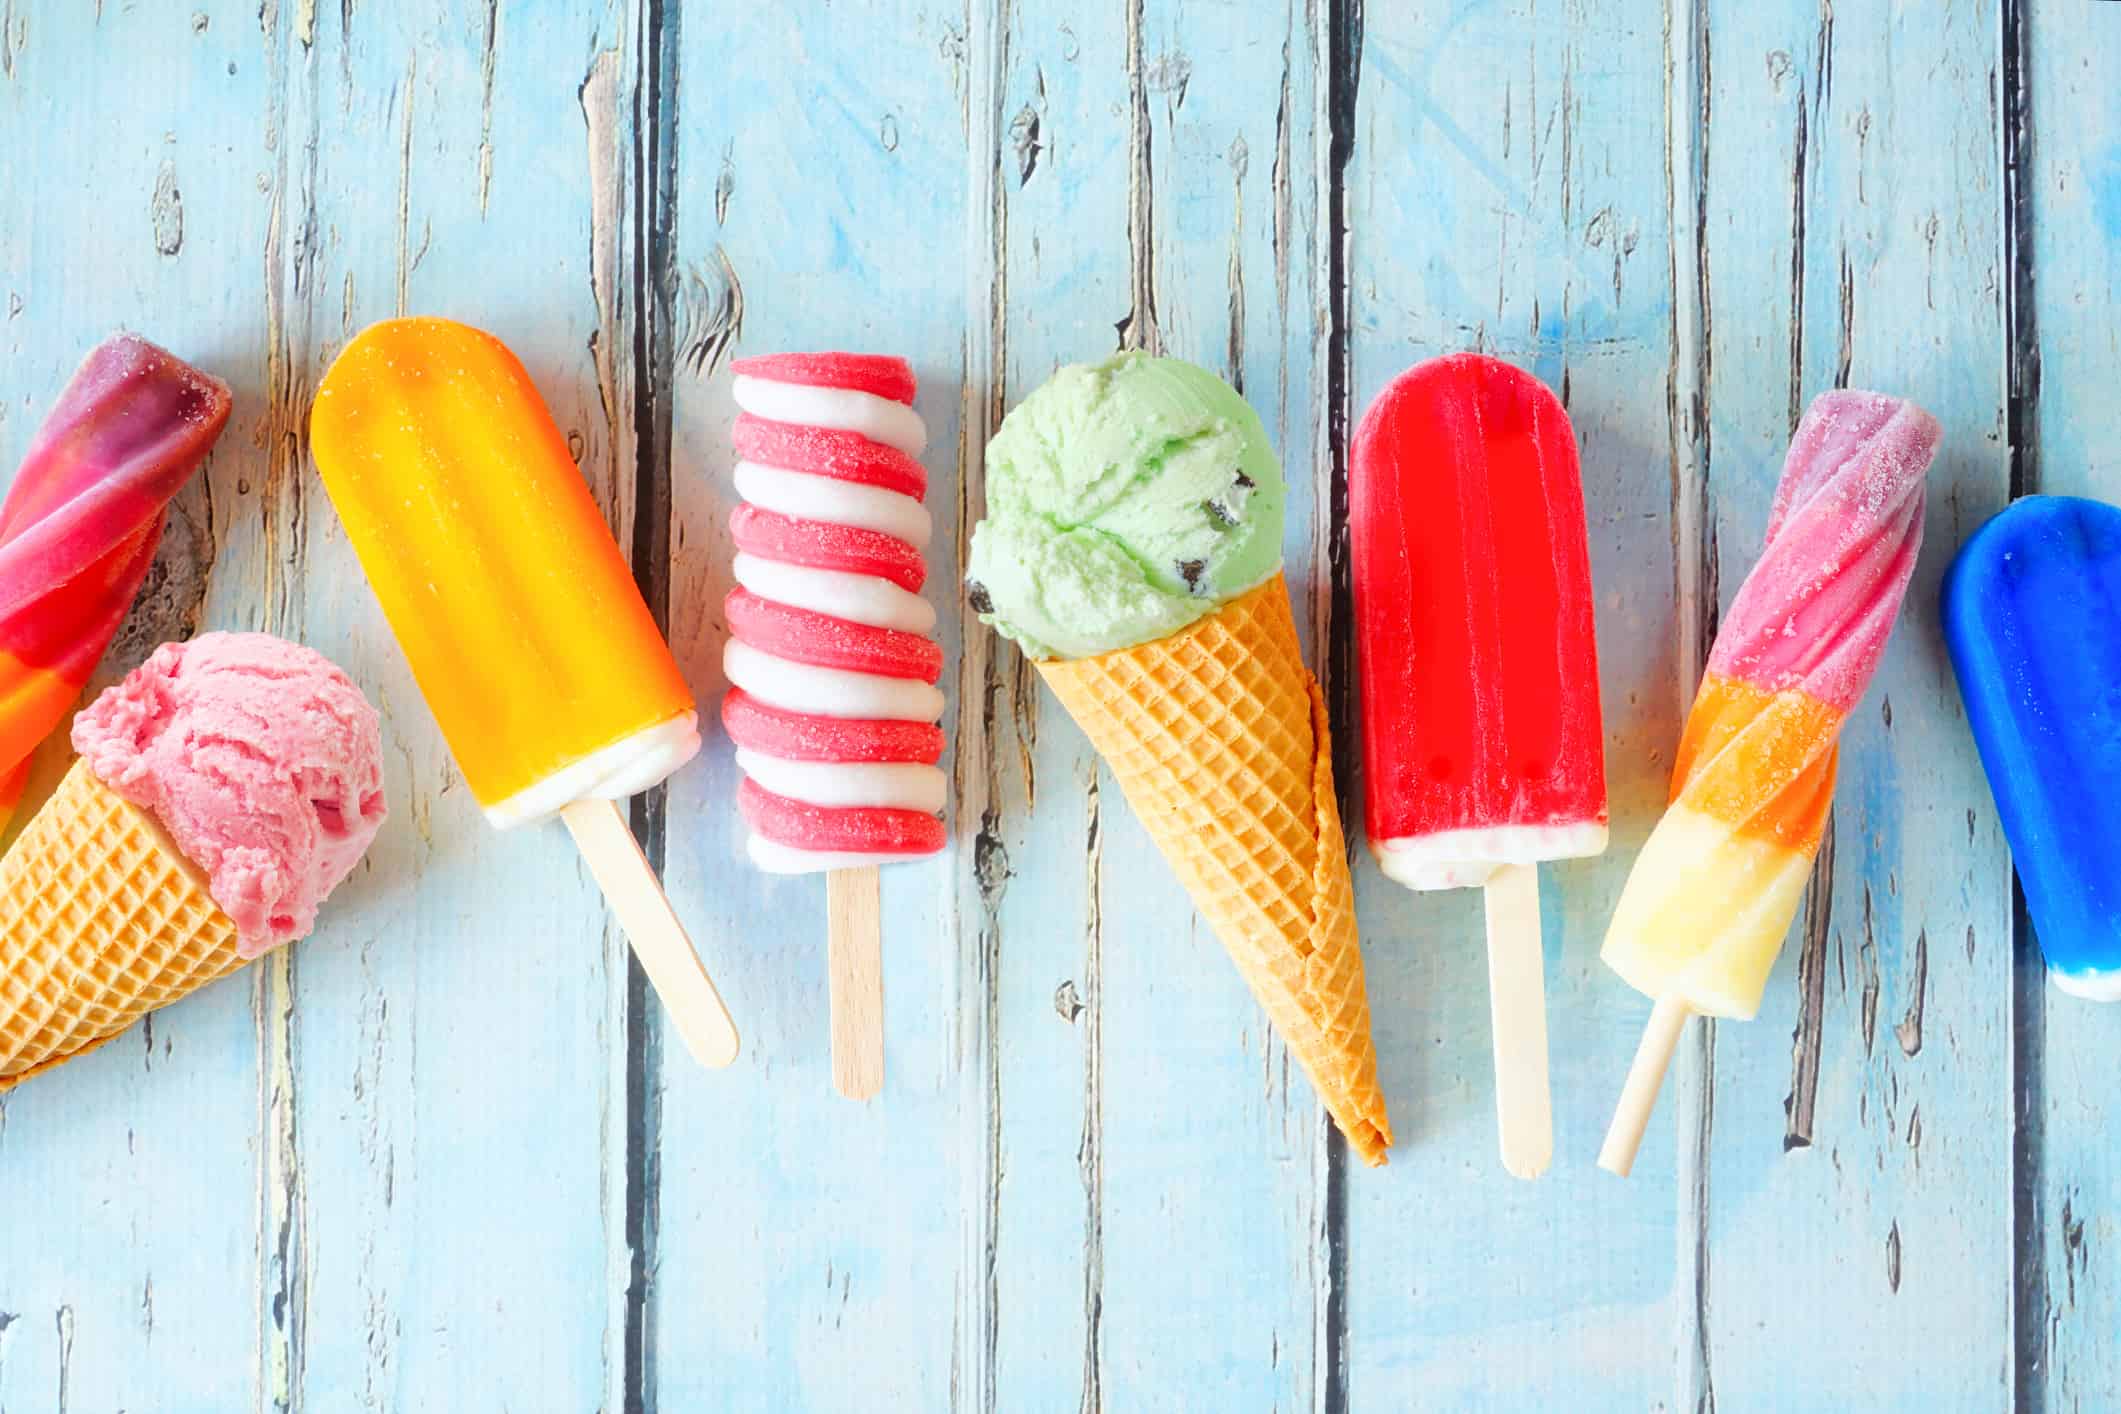 Selection of colorful summer popsicles and ice cream treats scattered on rustic blue wood